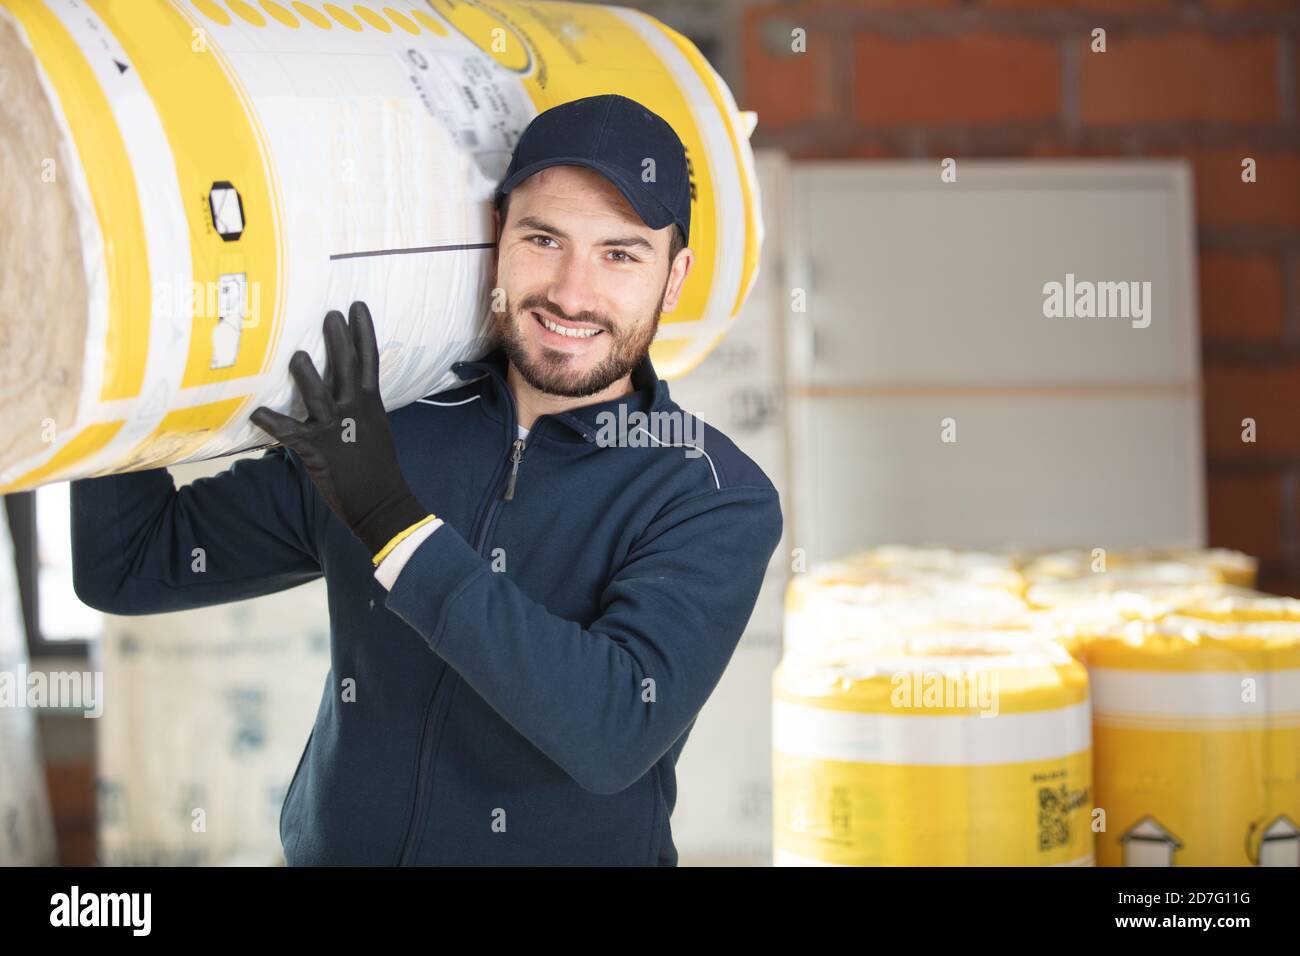 carrying a glass wool roll for insulation purpose Stock Photo